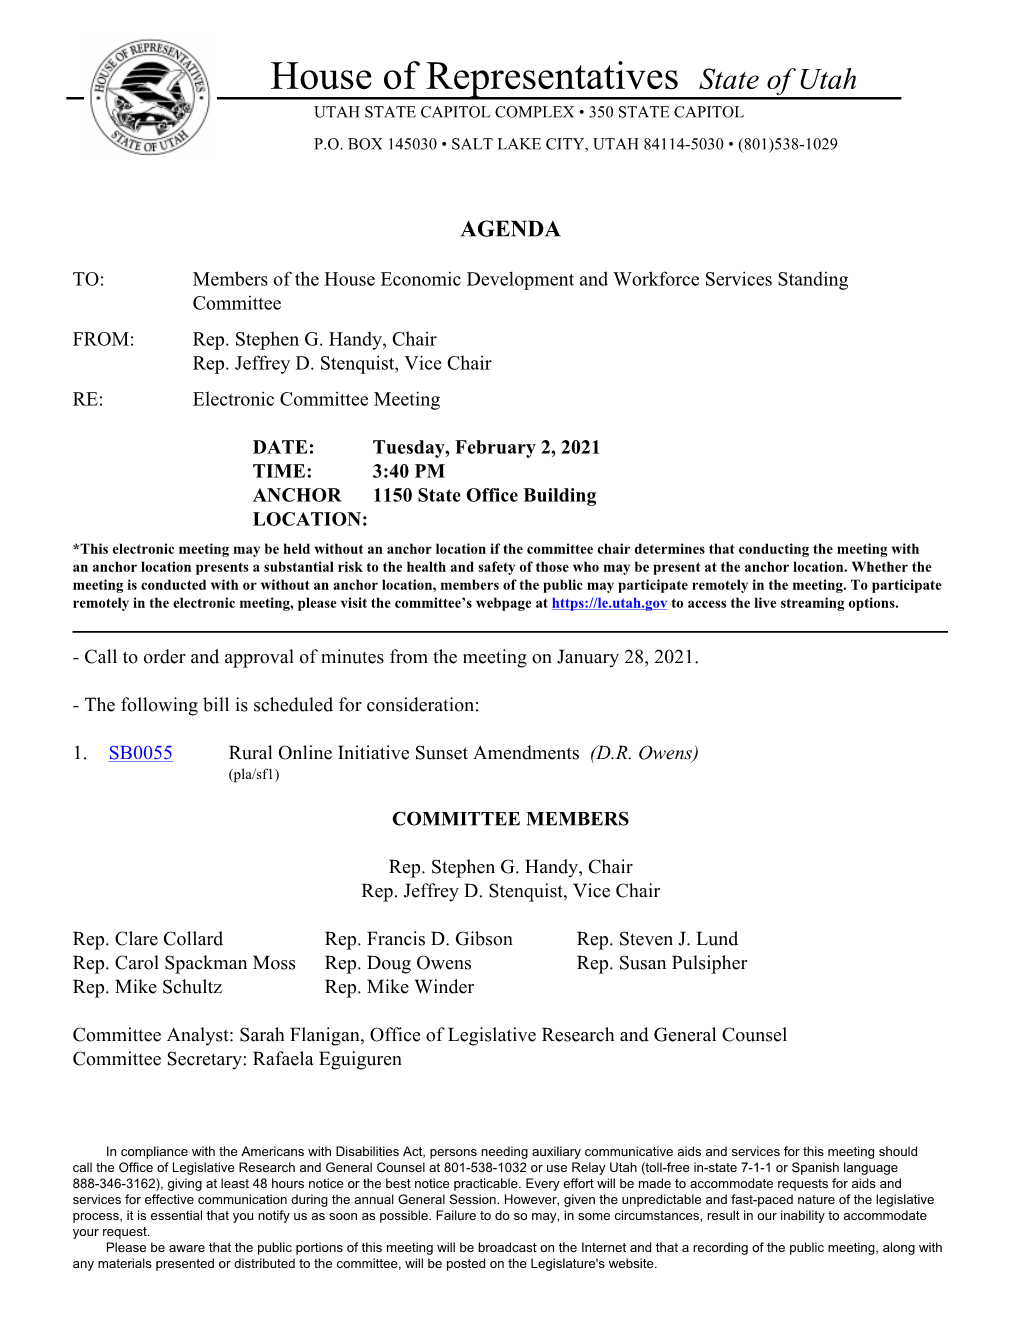 House Economic Development and Workforce Services Standing Committee FROM: Rep